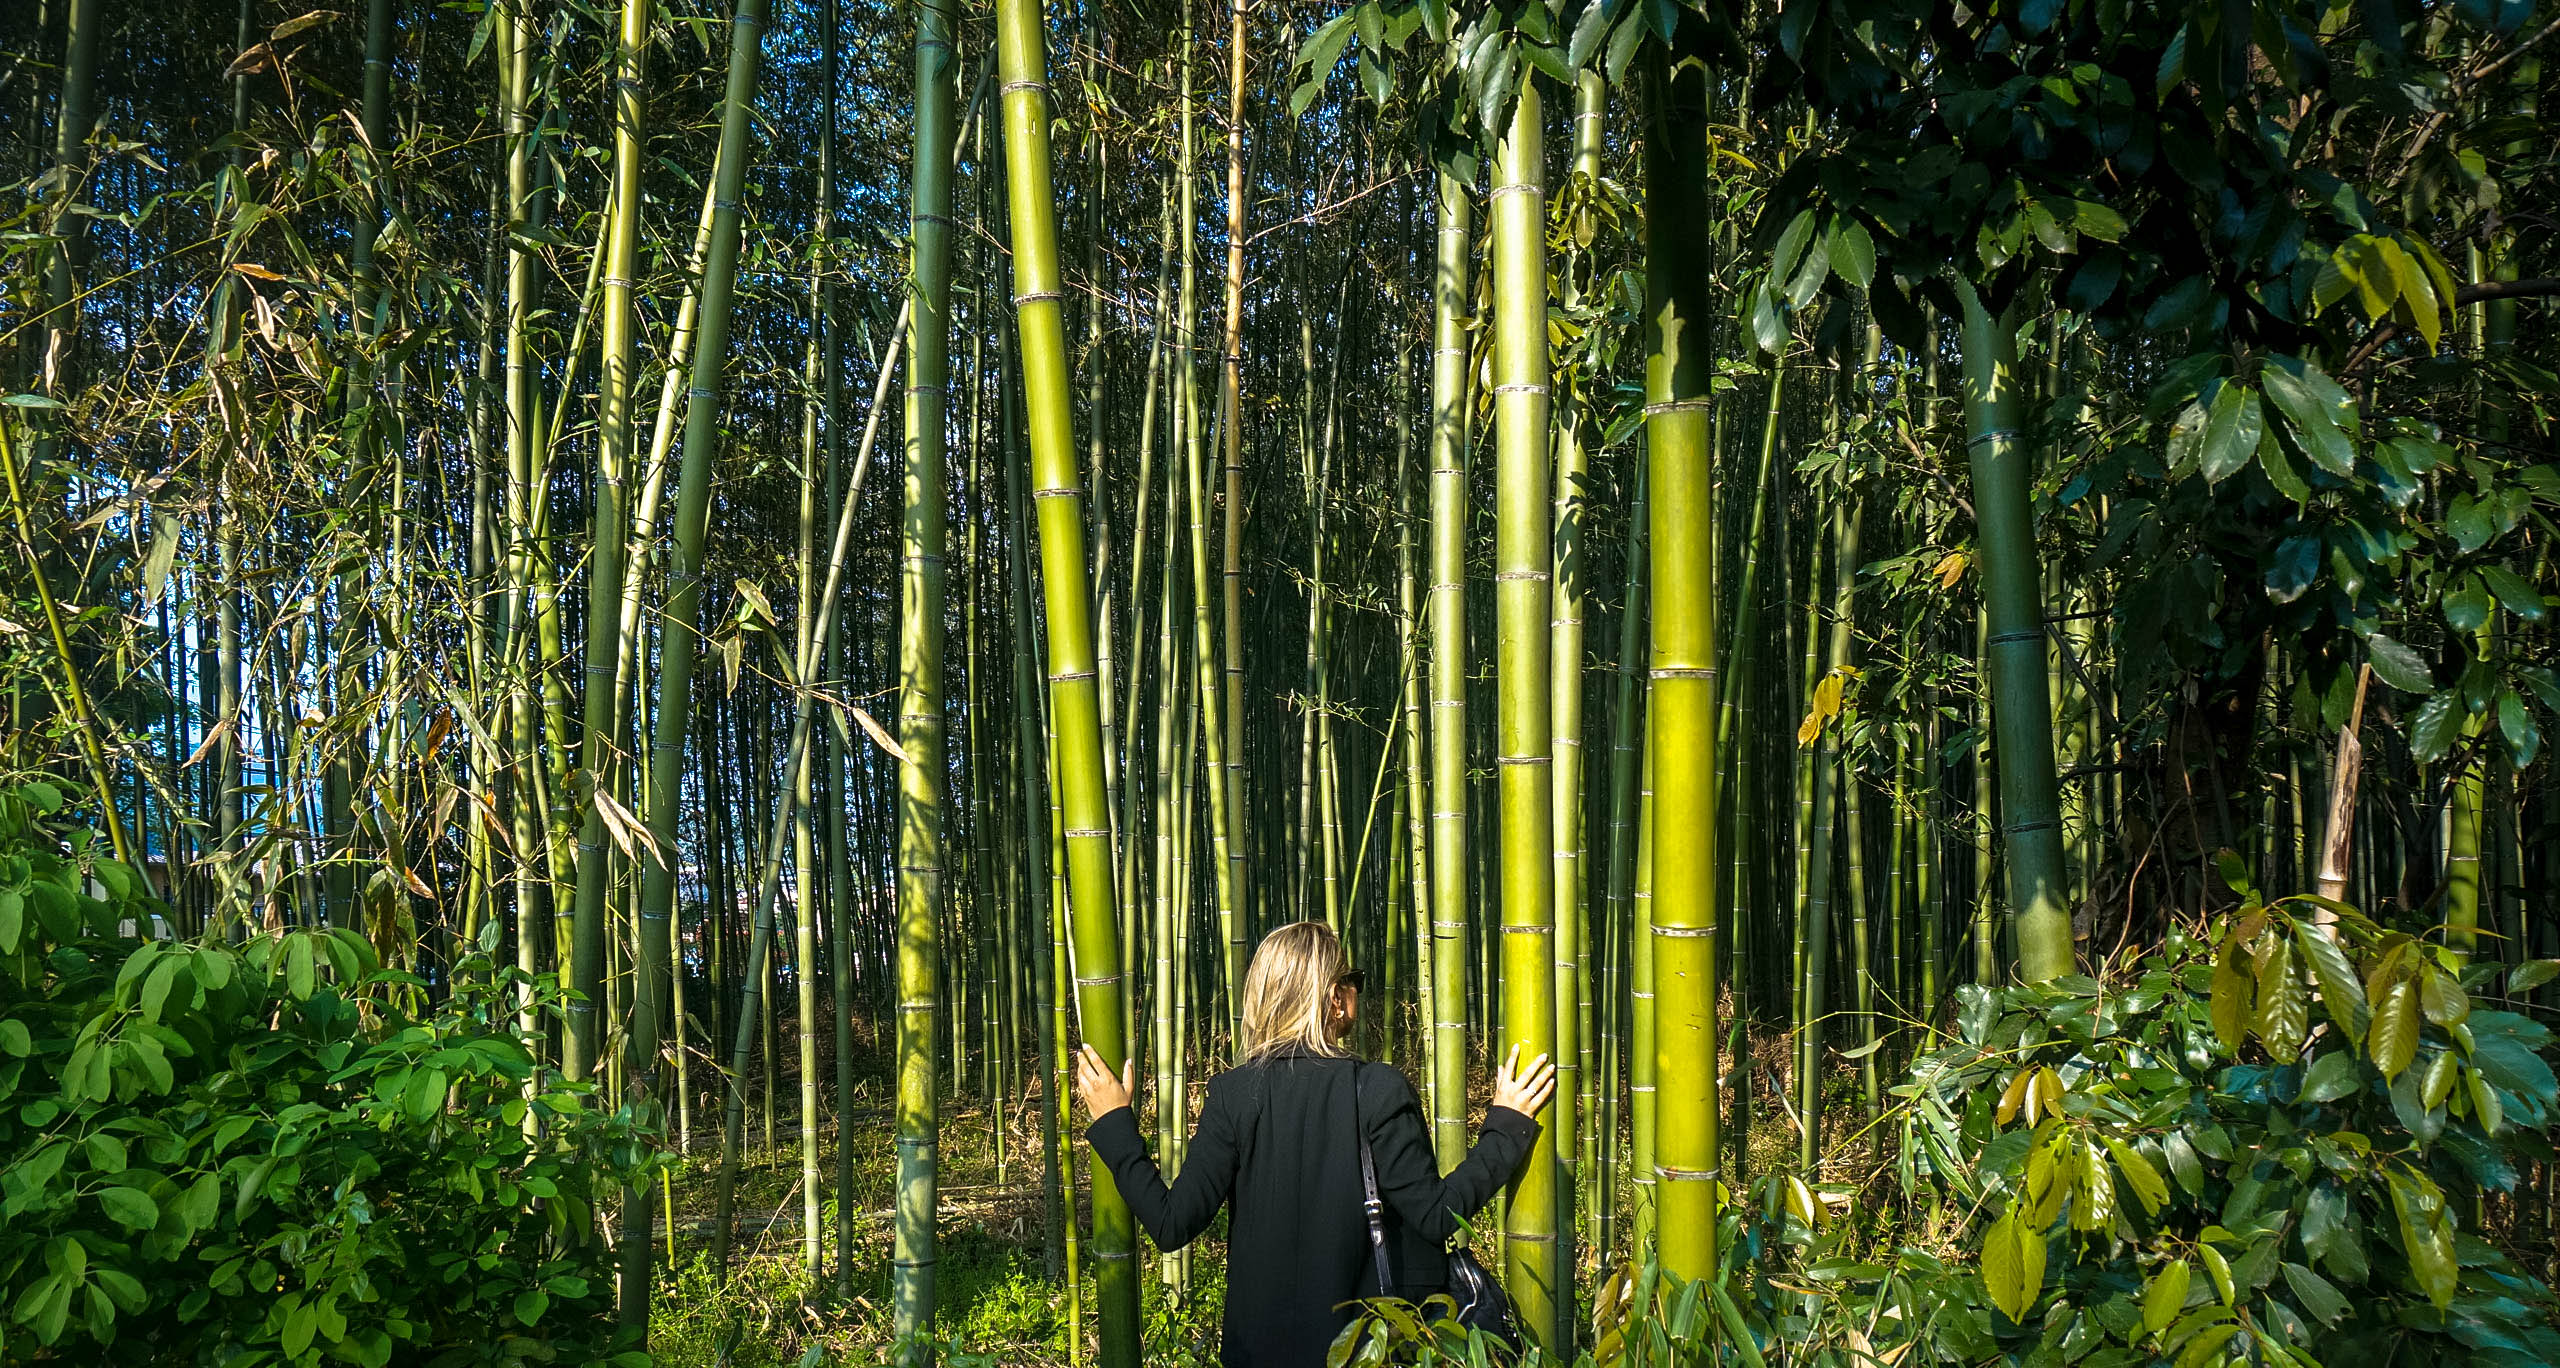 Getting Lost in the Bamboo Forest